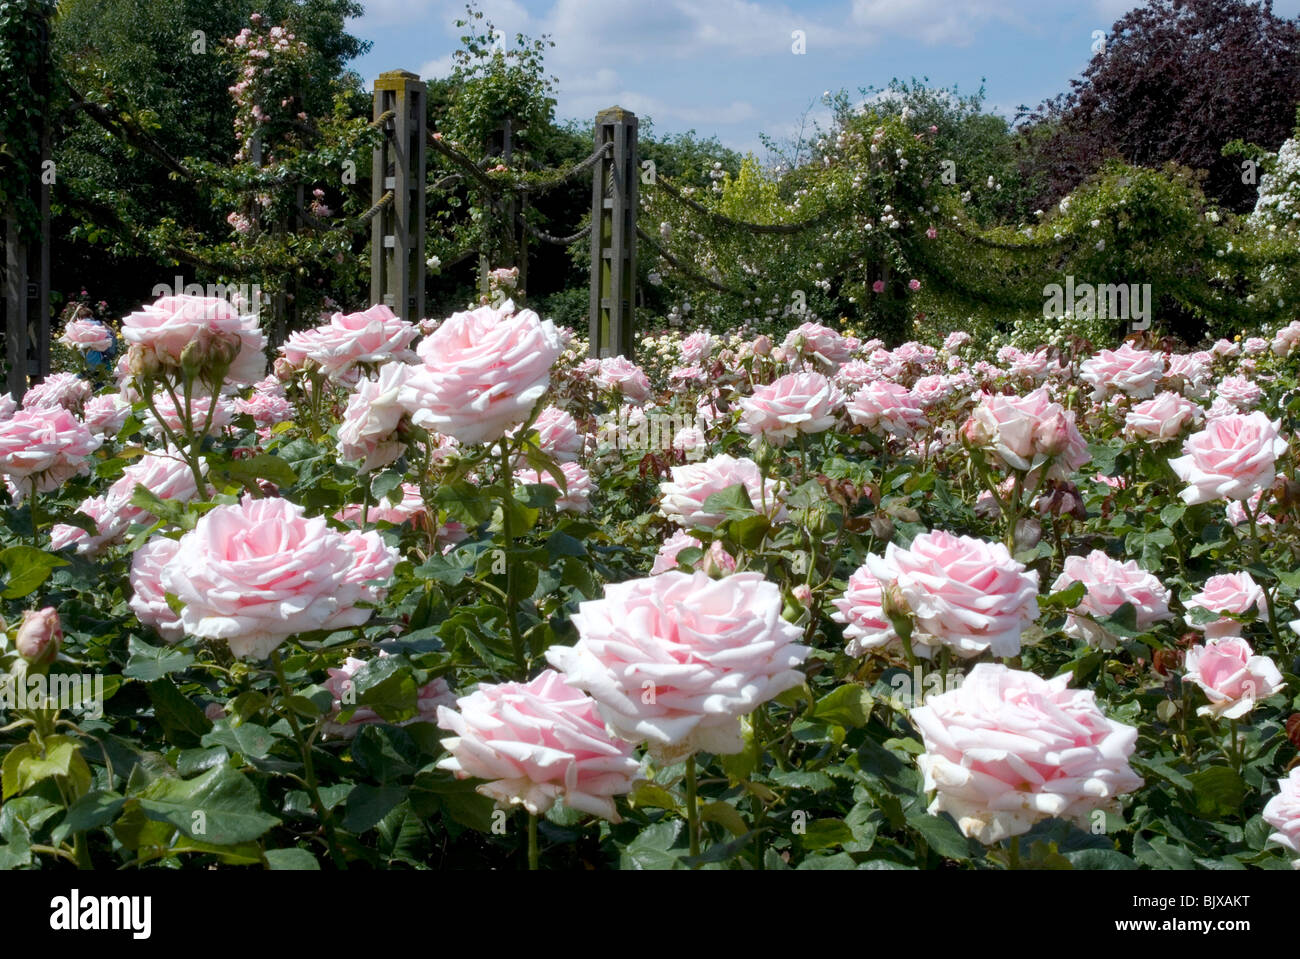 Roses, Queen Mary Gardens, Regent's Park, London, England. Stock Photo